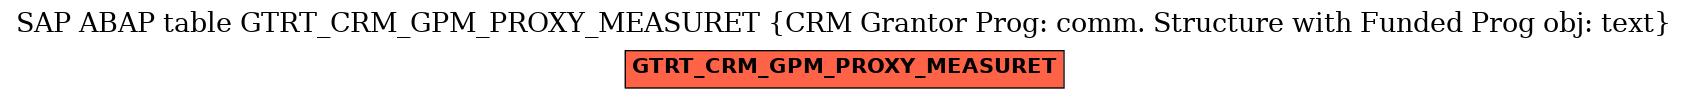 E-R Diagram for table GTRT_CRM_GPM_PROXY_MEASURET (CRM Grantor Prog: comm. Structure with Funded Prog obj: text)